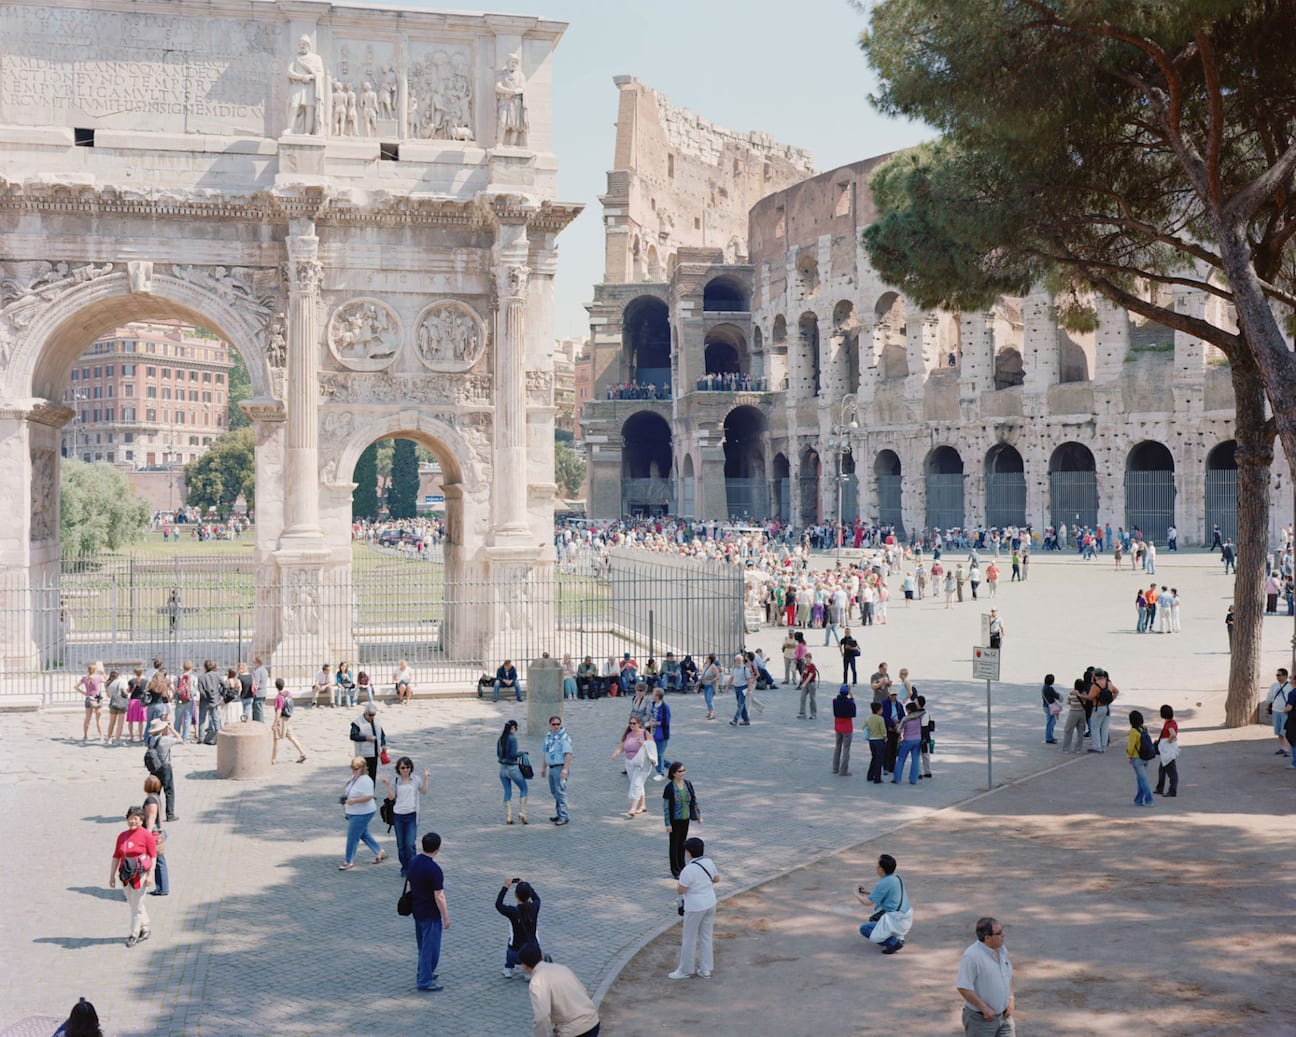 Visitors in front of the Arch of Titus and Colosseum in Rome, by Massimo Vitali